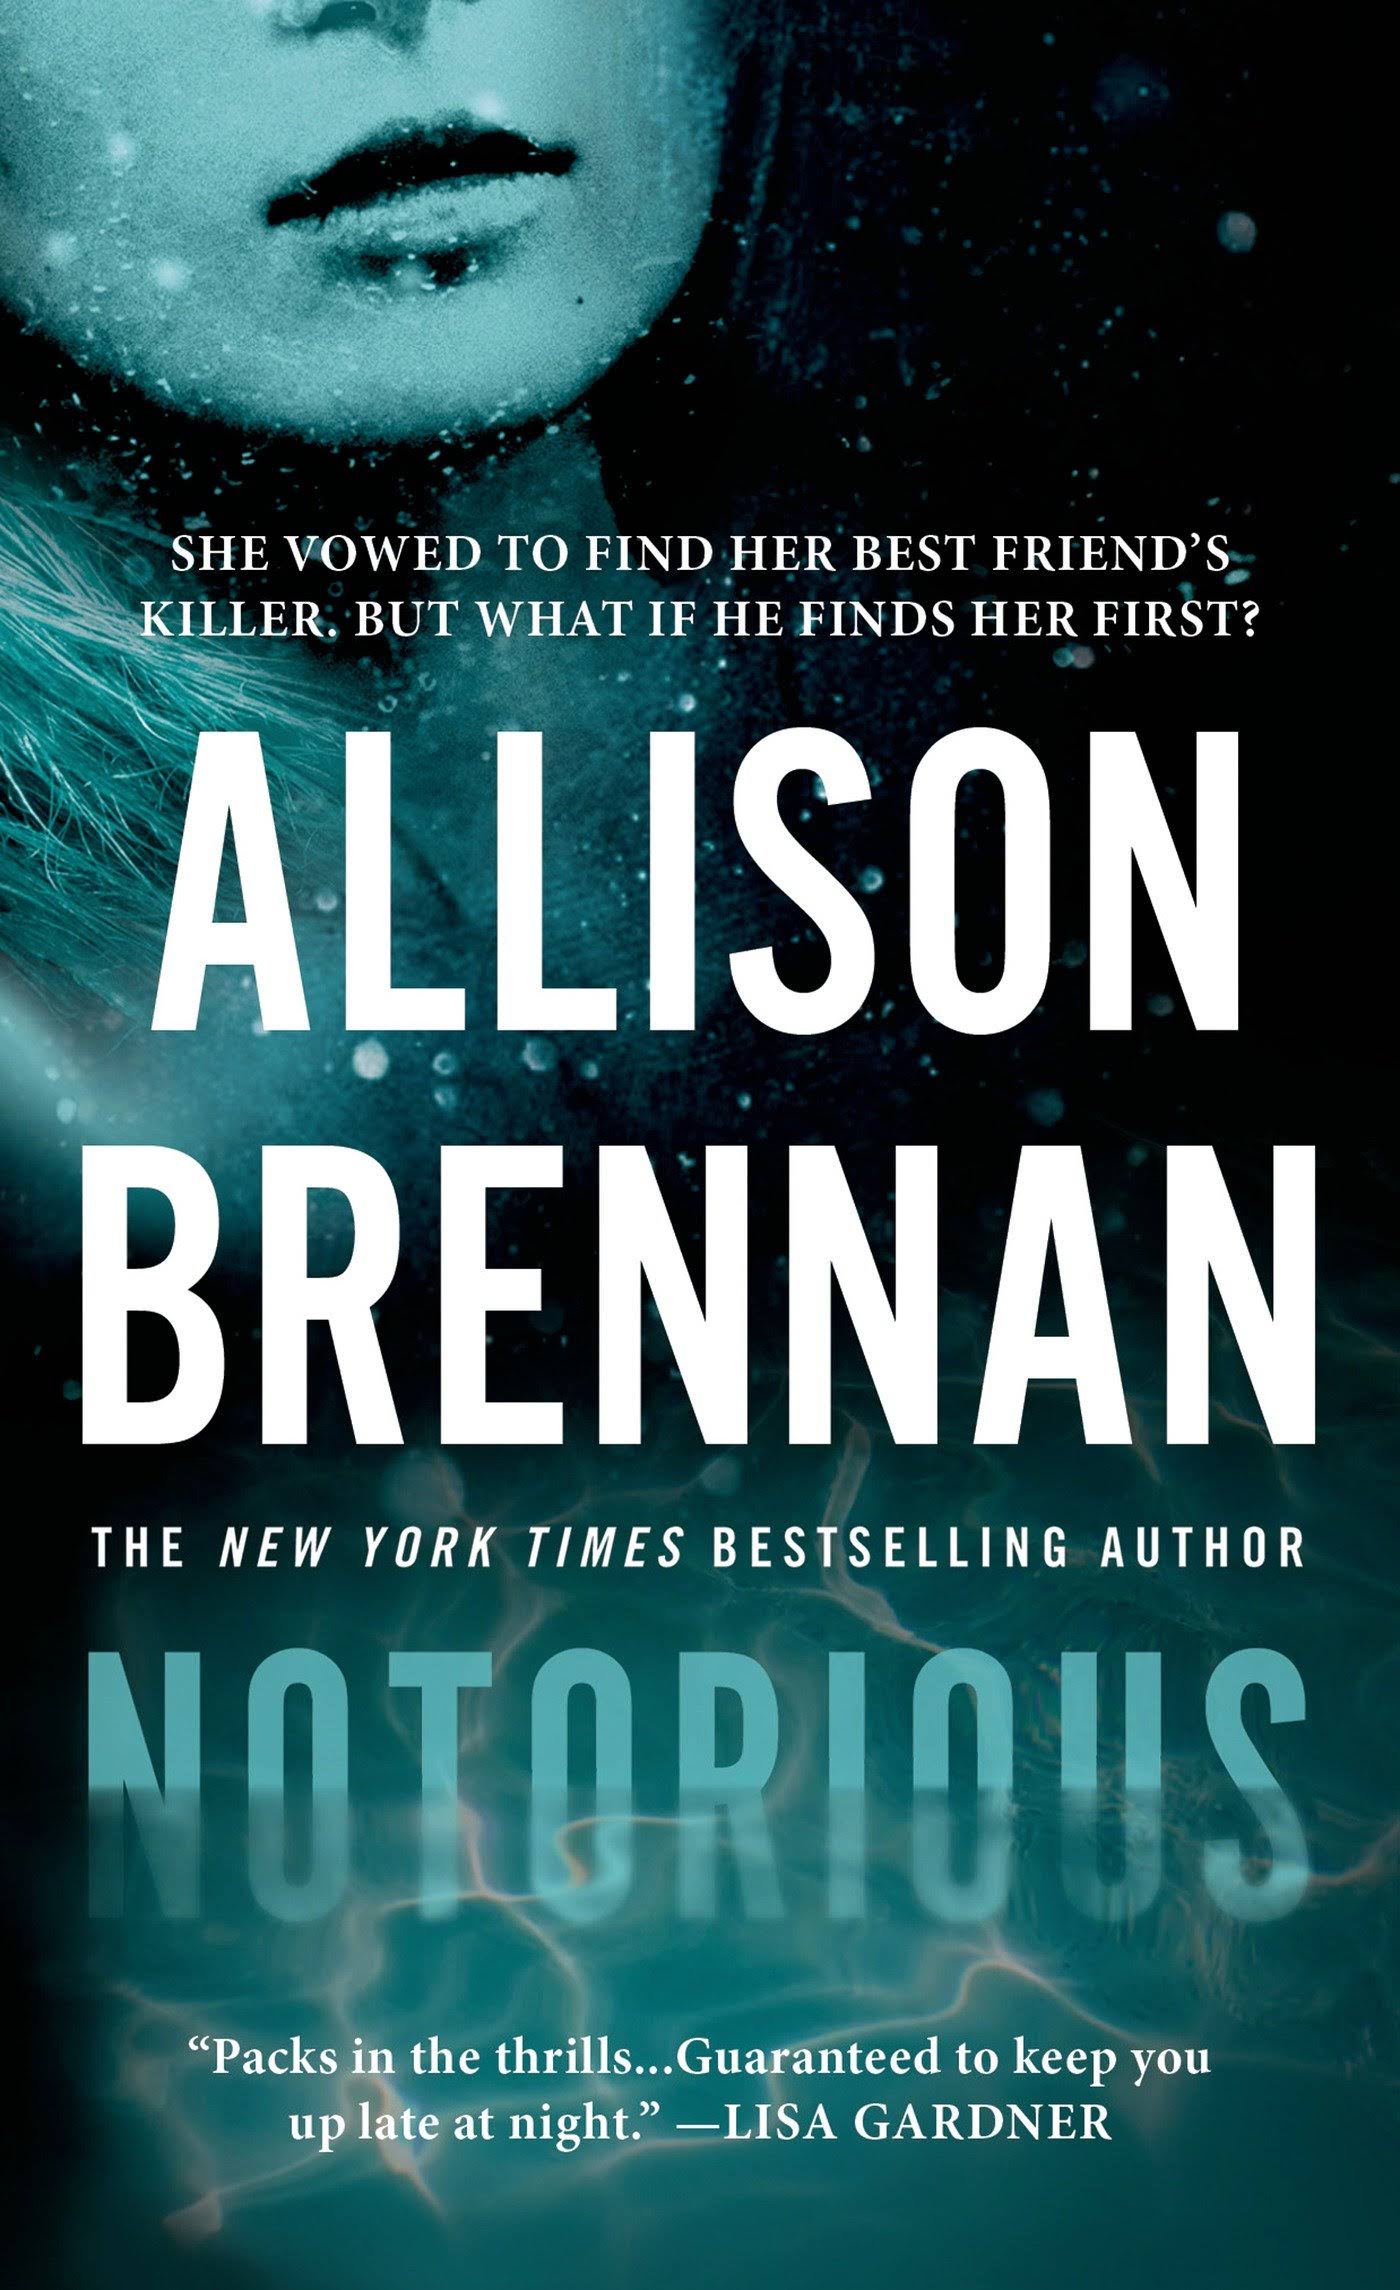 Notorious [Book]